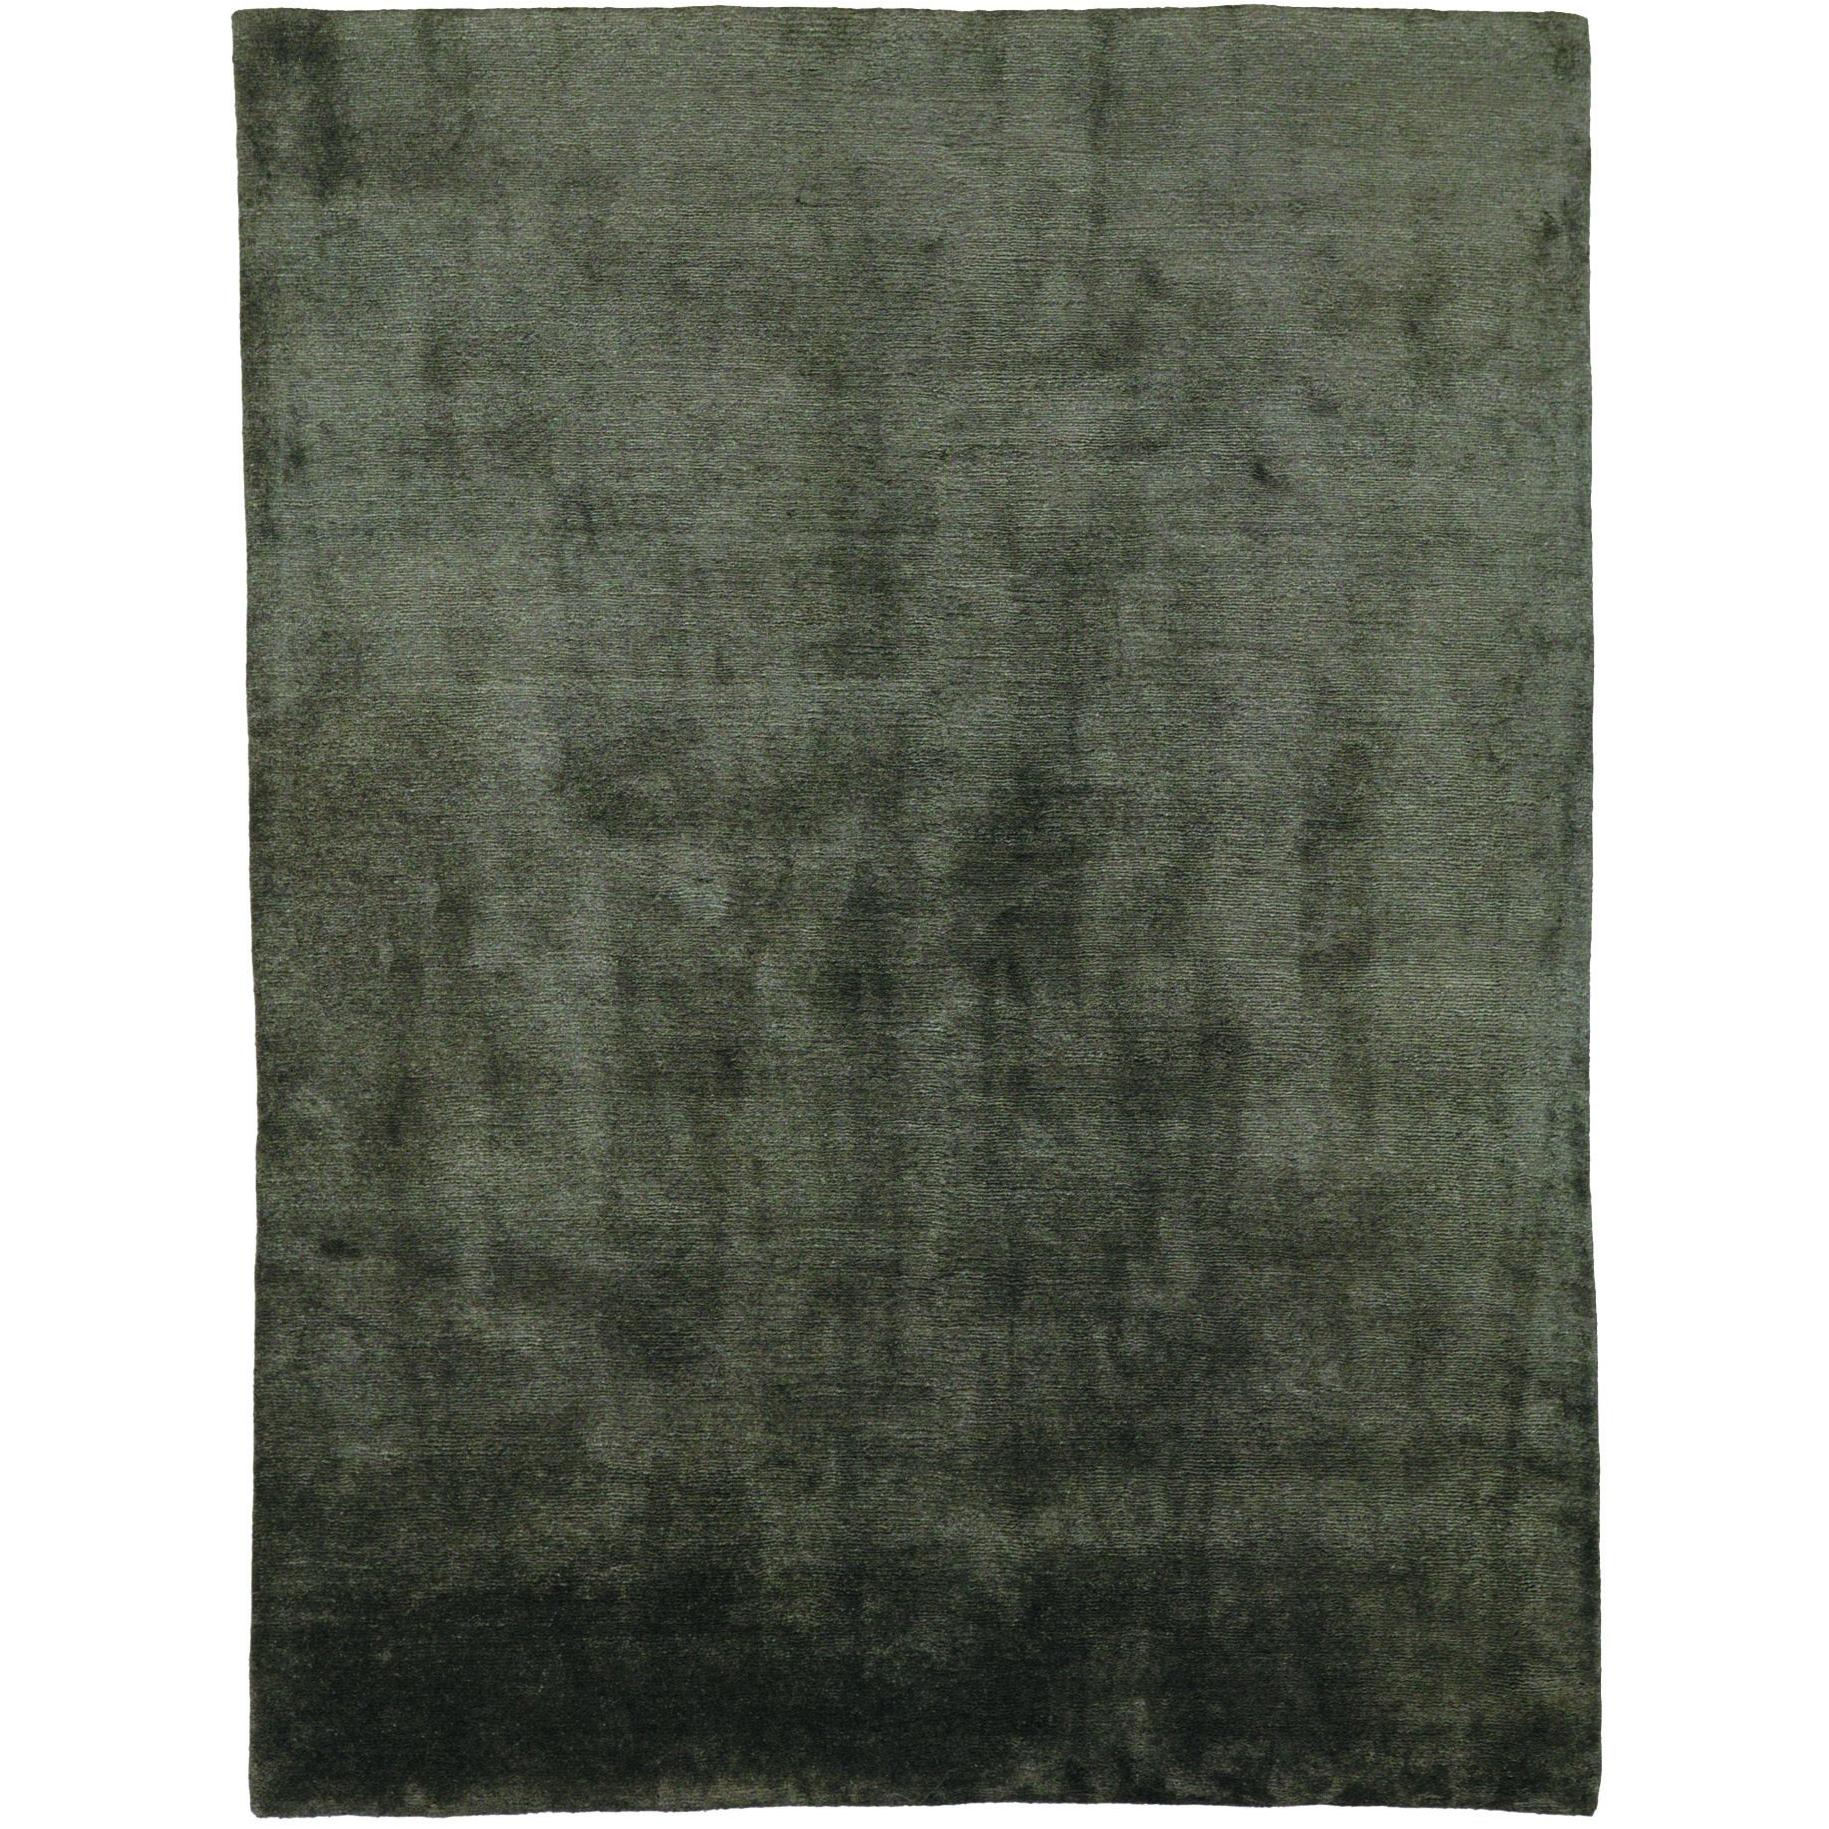 Mohair Slate Hand-Knotted 10x8 Rug in Wool by The Rug Company